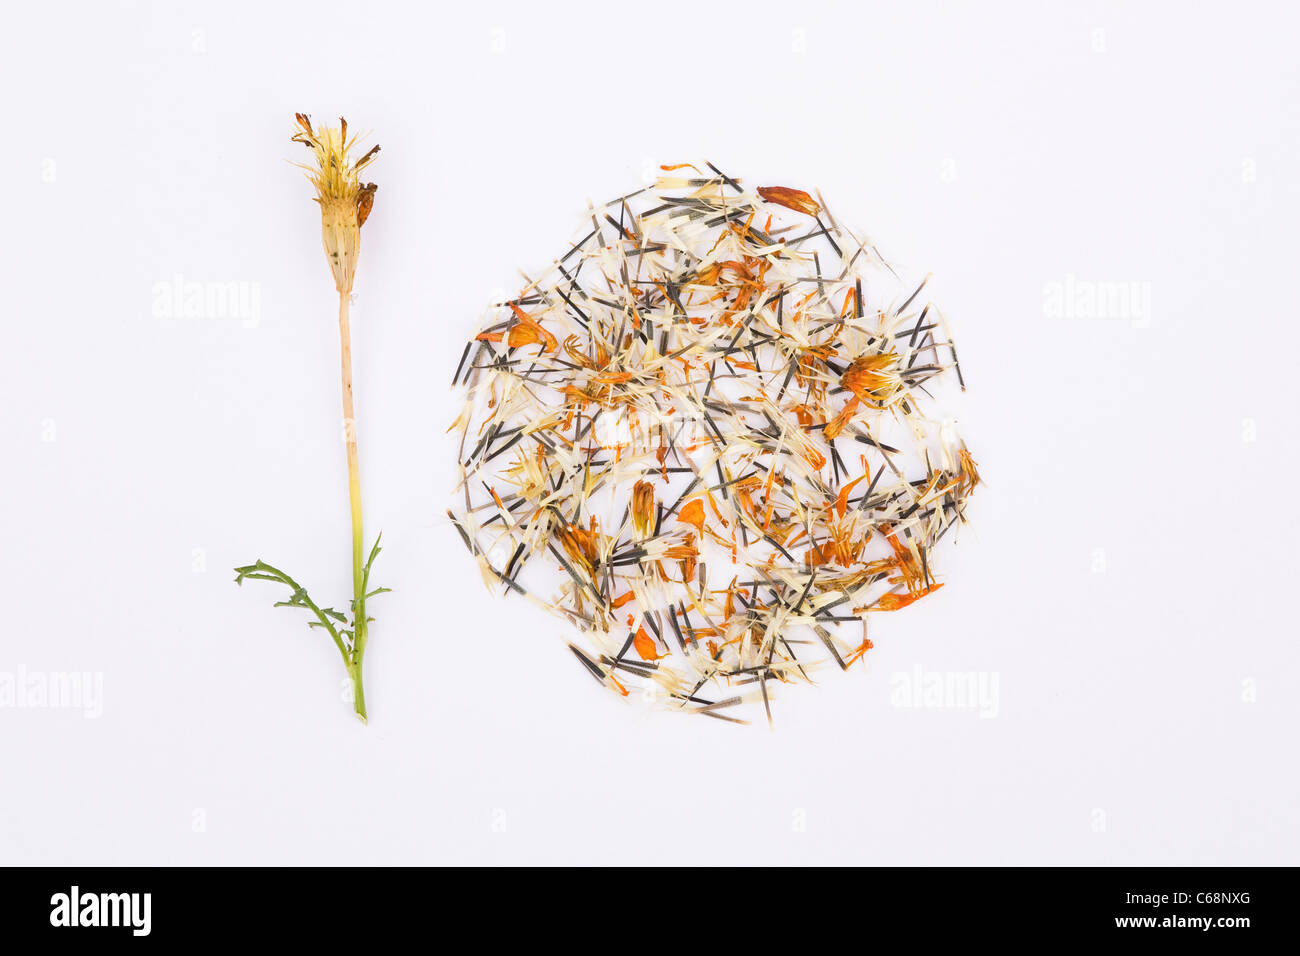 Tagetes patula . French marigold seeds and seedhead on a white background. Stock Photo